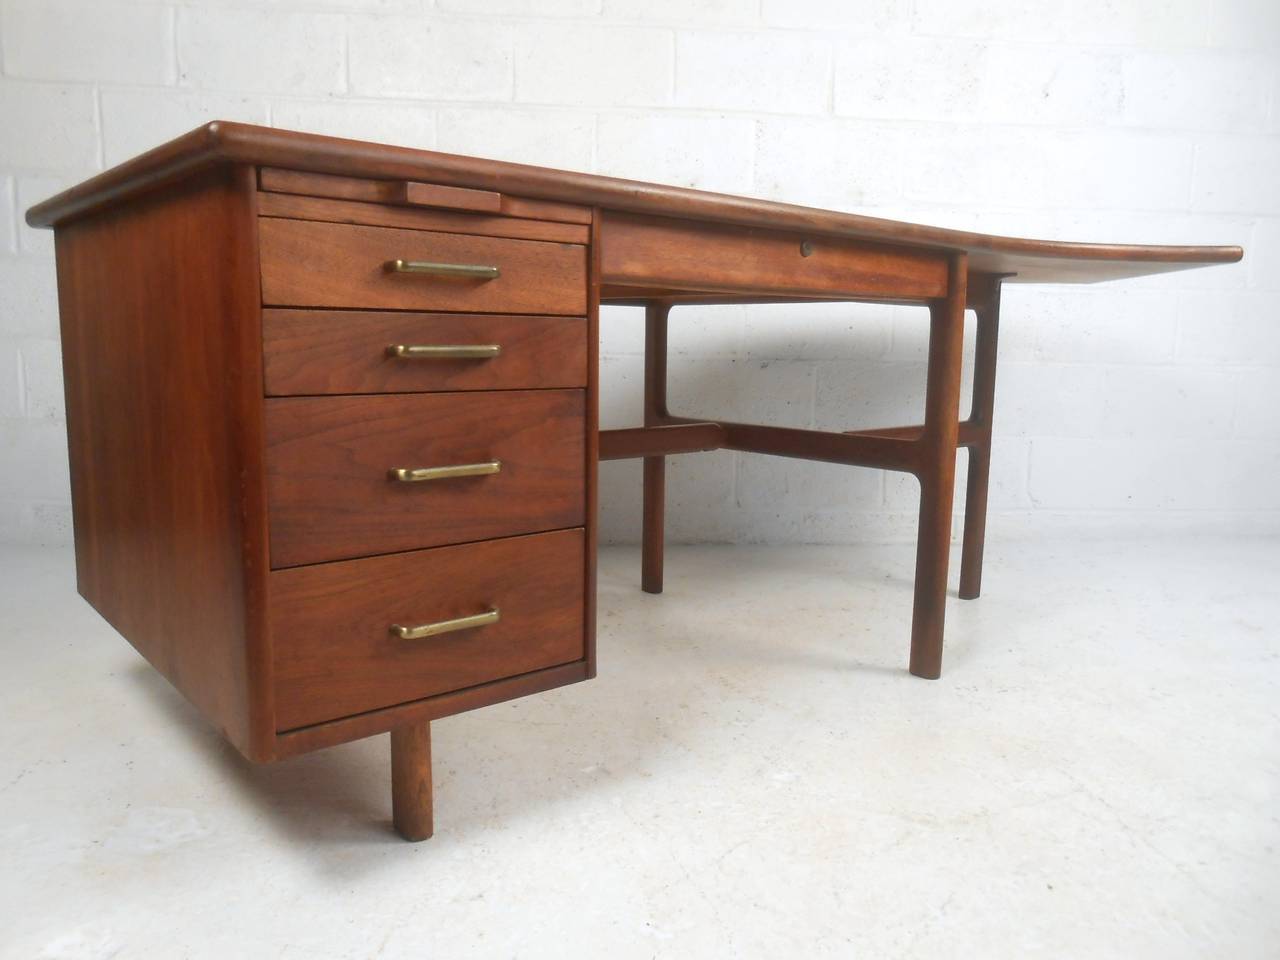 This imposing vintage desk features sturdy walnut construction, brass drawer pulls, and heavy duty metal drawer glides. Plenty of work space for any office, the uniquely shaped desk top adds to it's versatility and style. Please confirm item